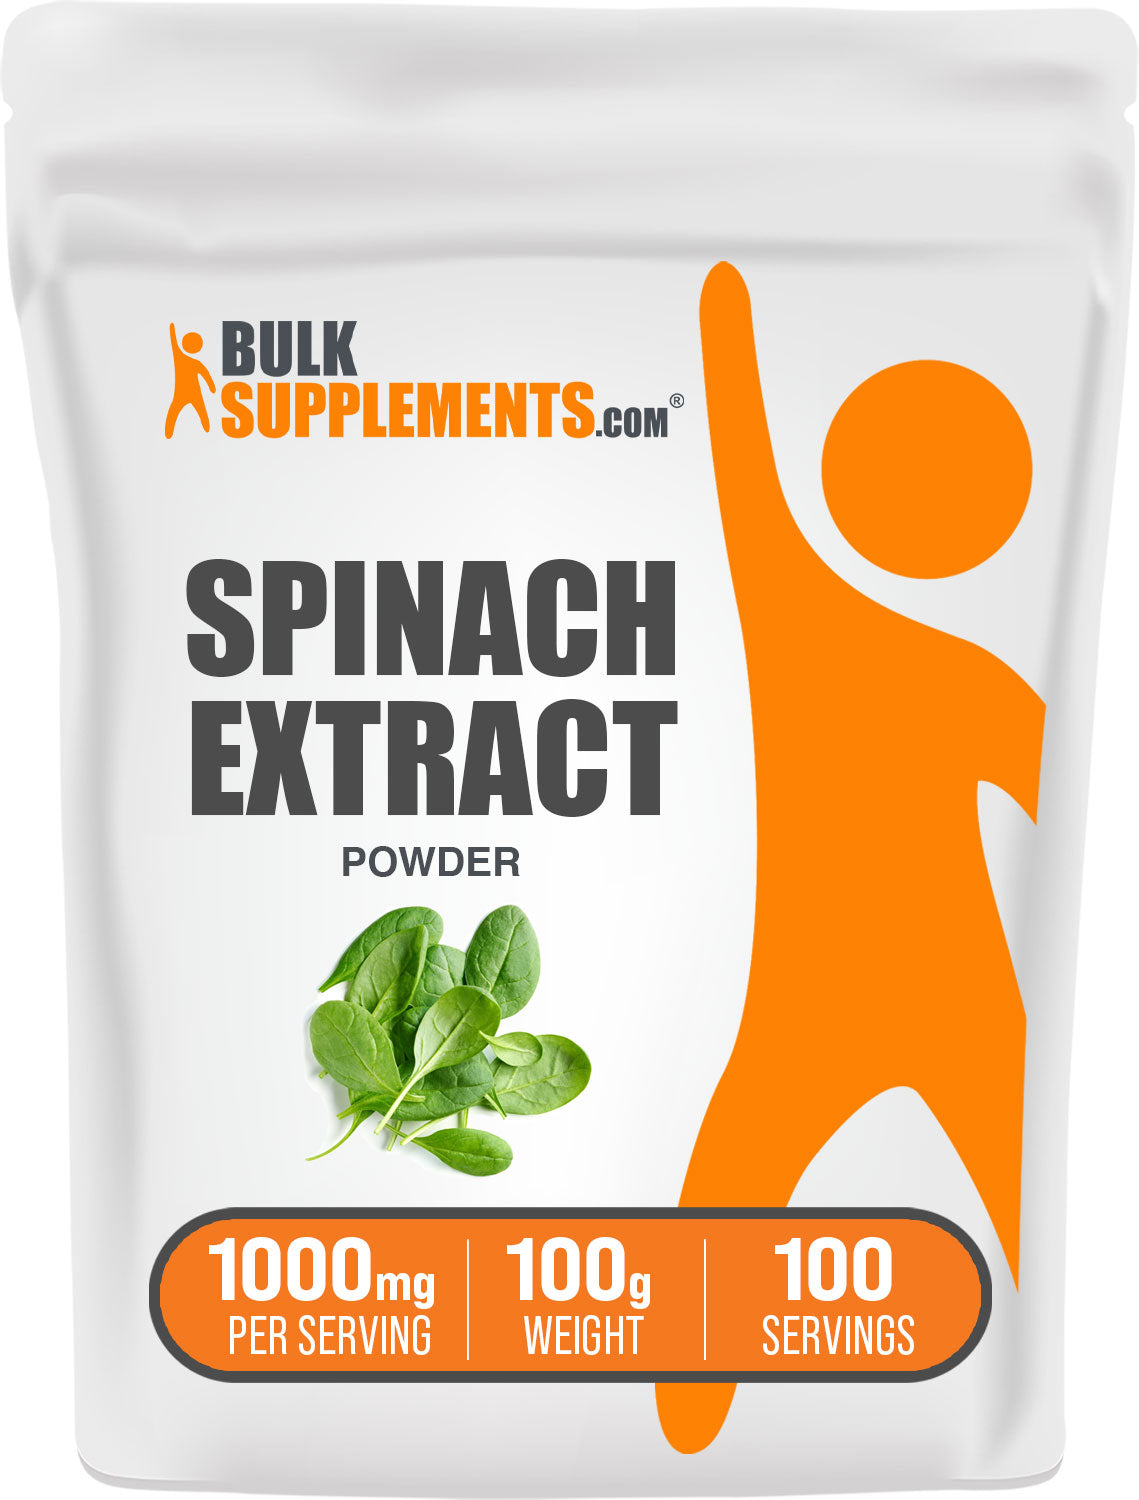 BulkSupplements Spinach Extract Powder 100g bag